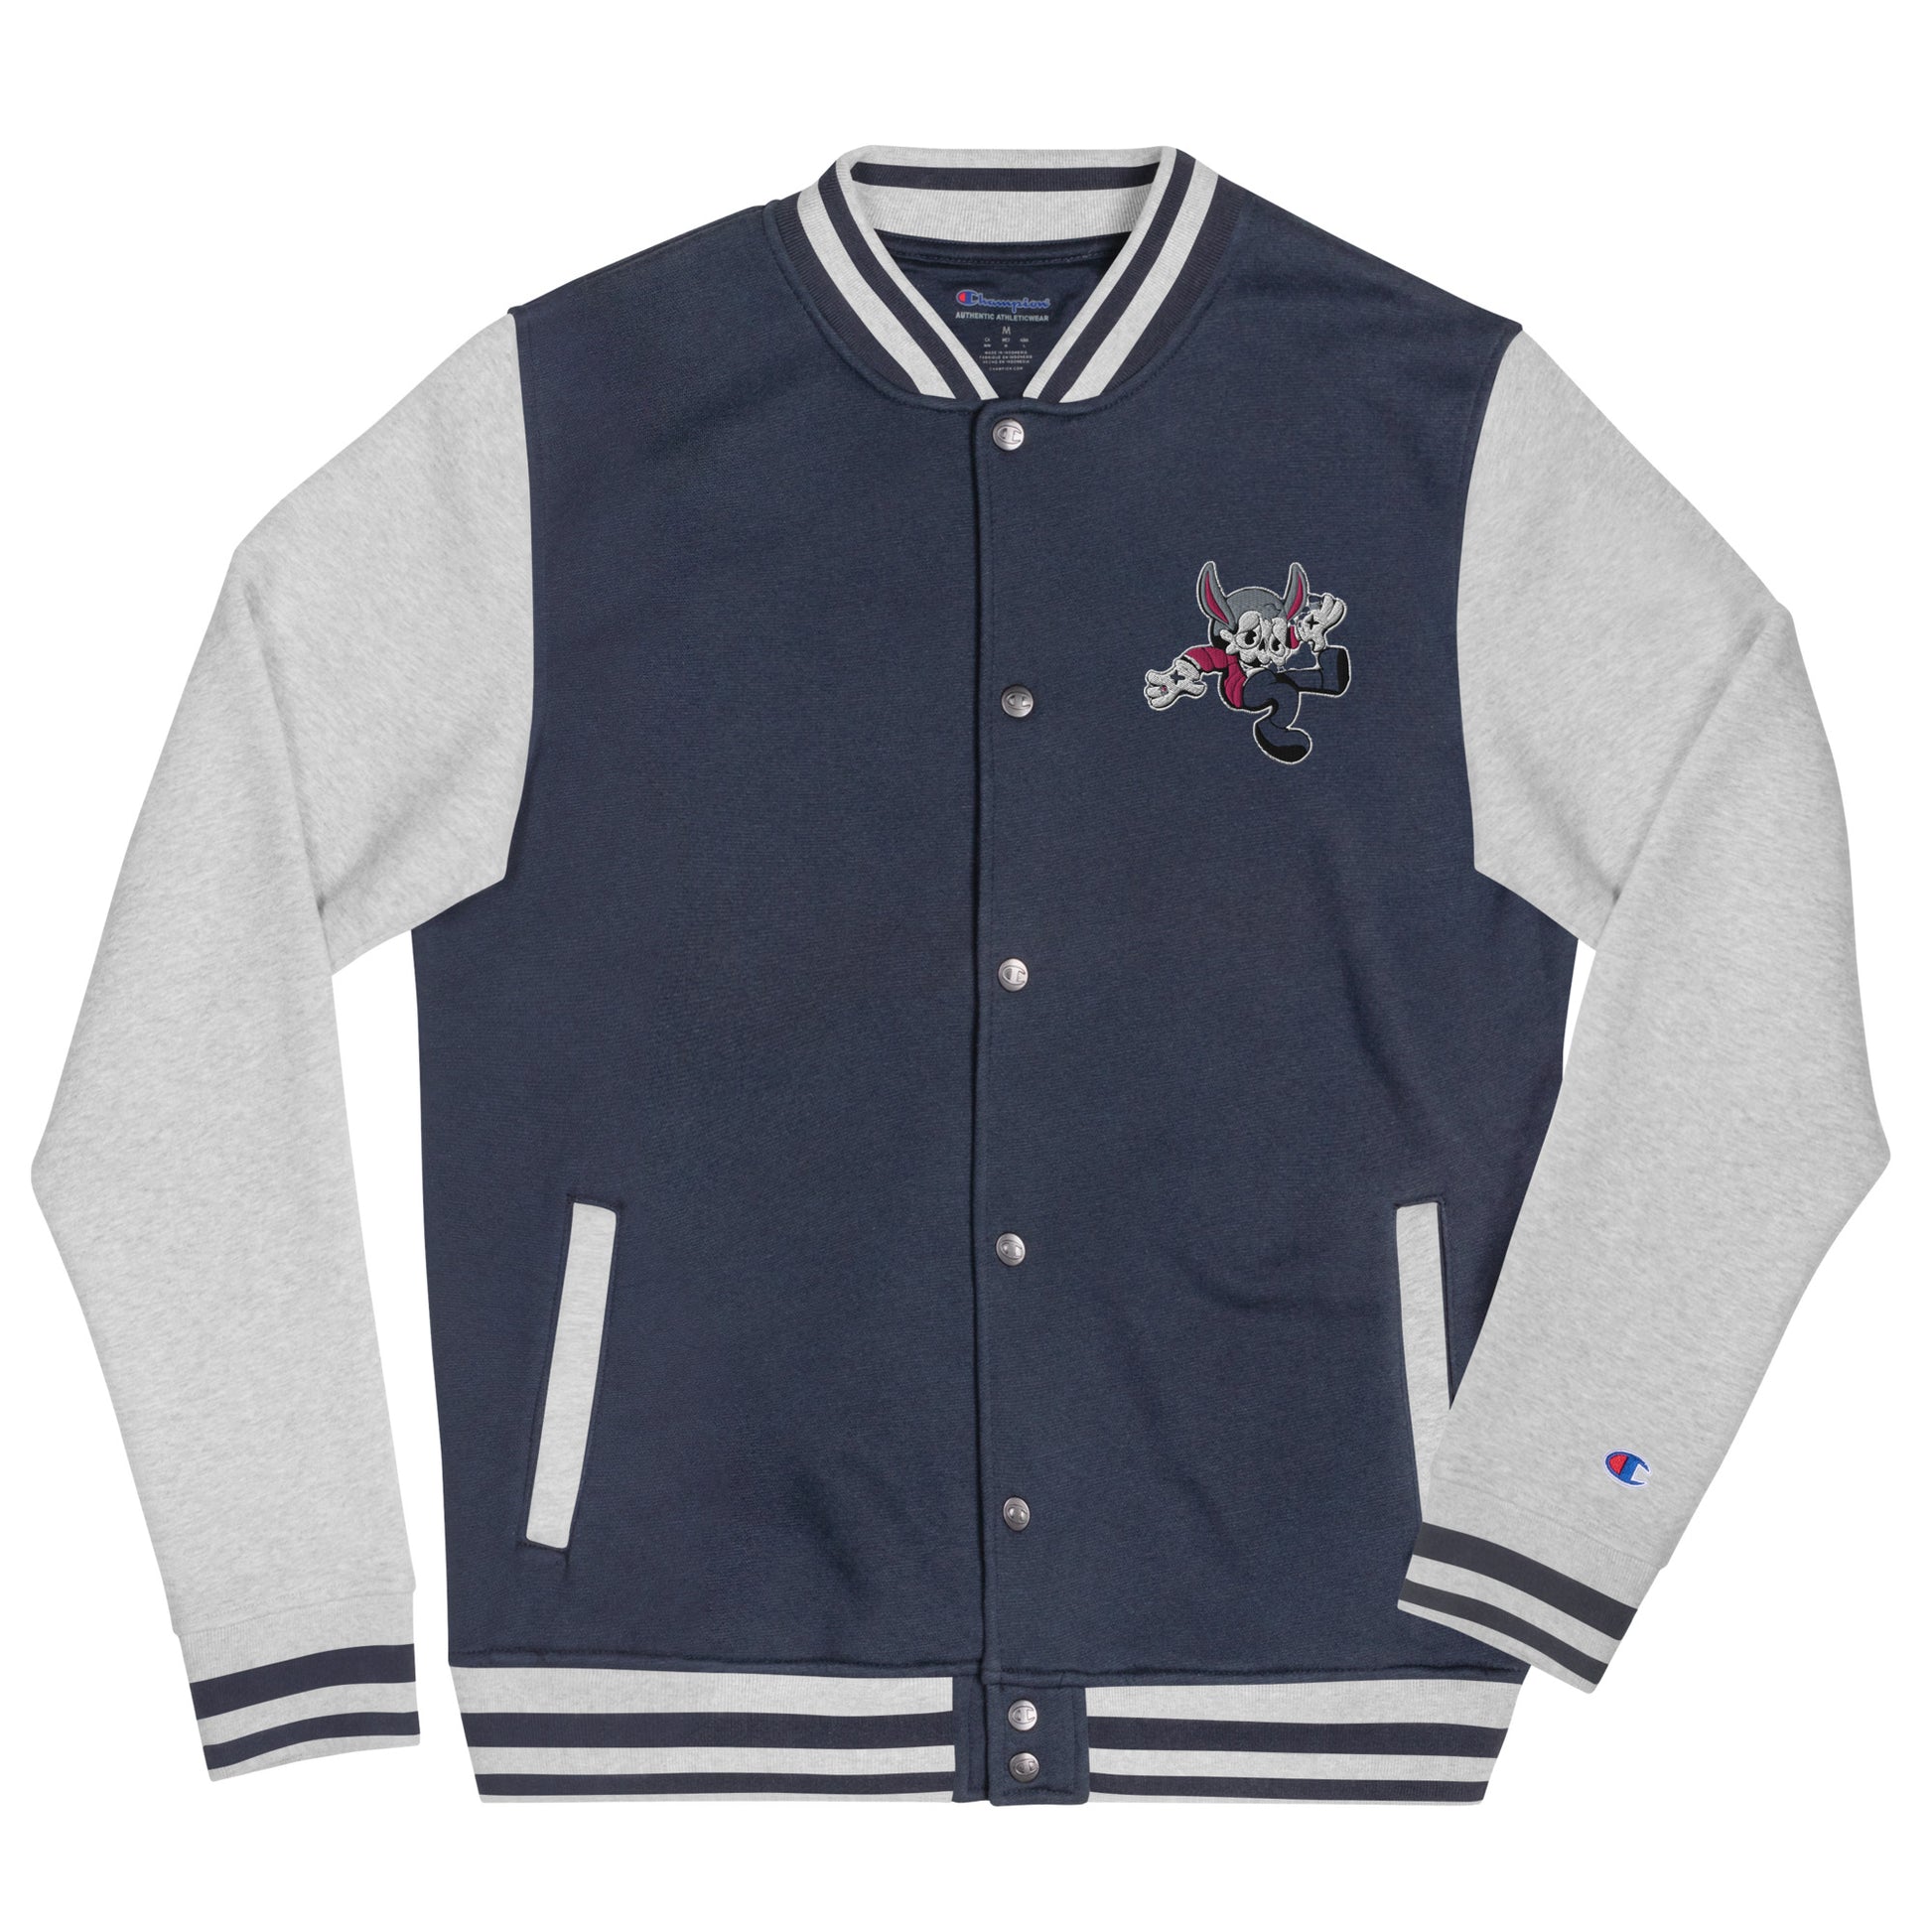 Embroidered Pop 214 Champion Bomber Jacket - Random the Ghost